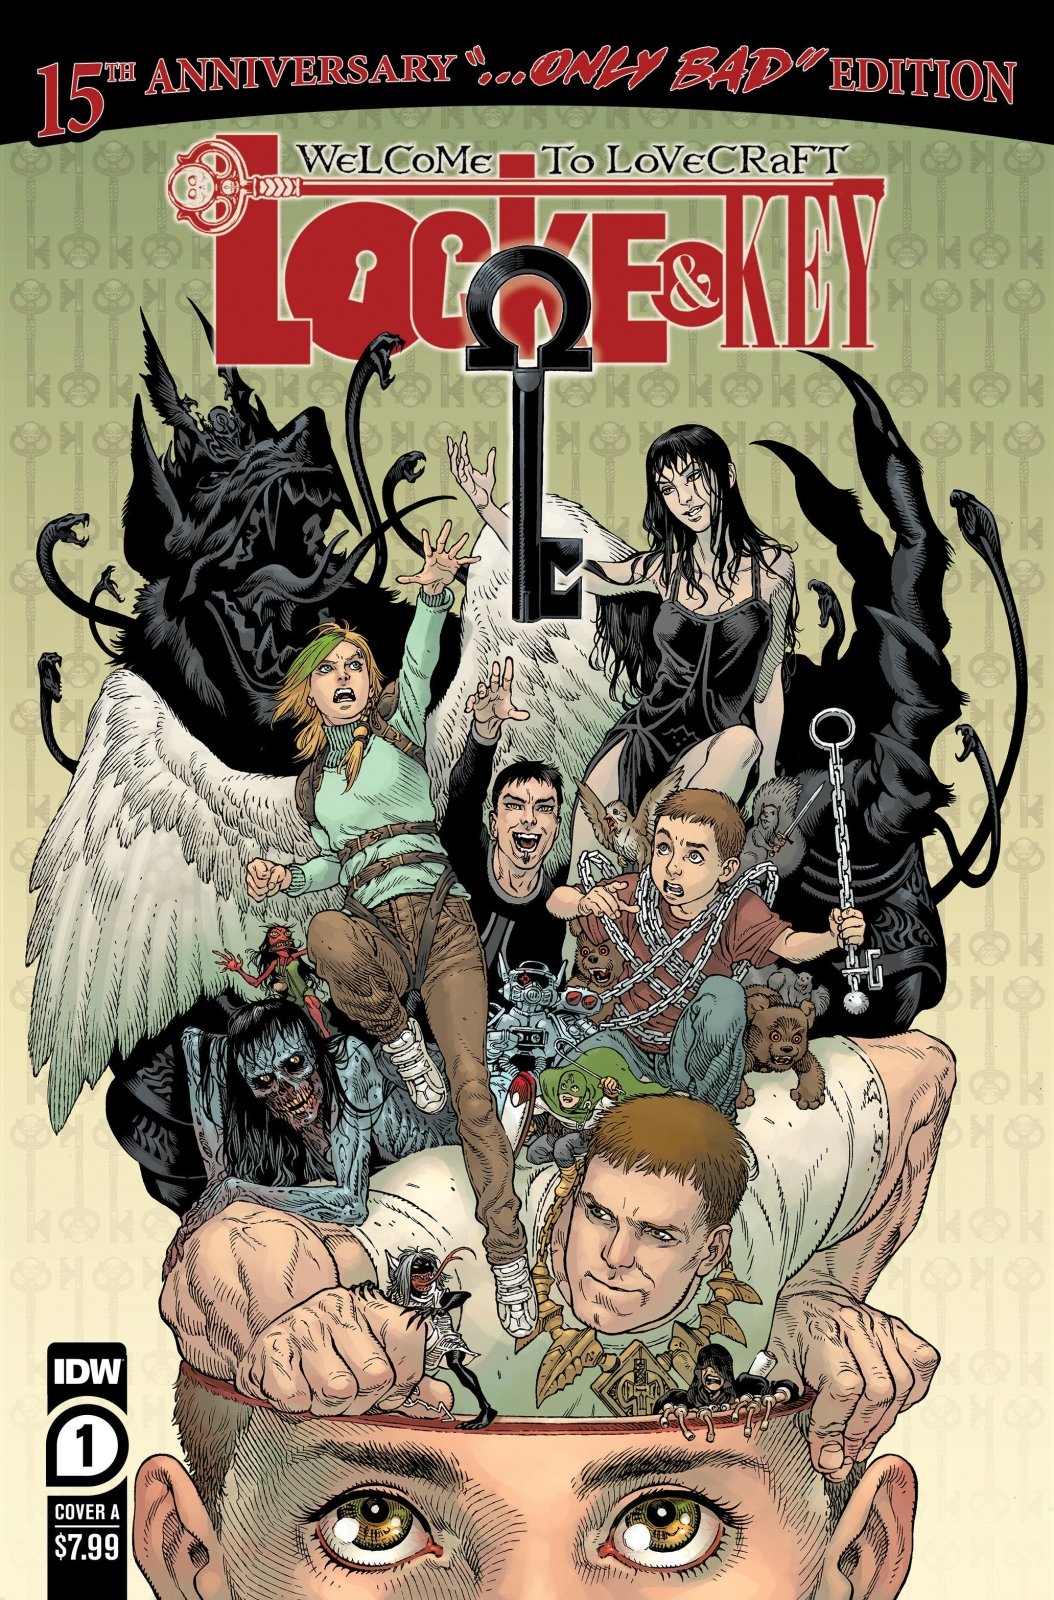 Locke & Key: Welcome To Lovecraft #1--15th Anniversary Edition Variant A (Rodriguez) - The Fourth Place